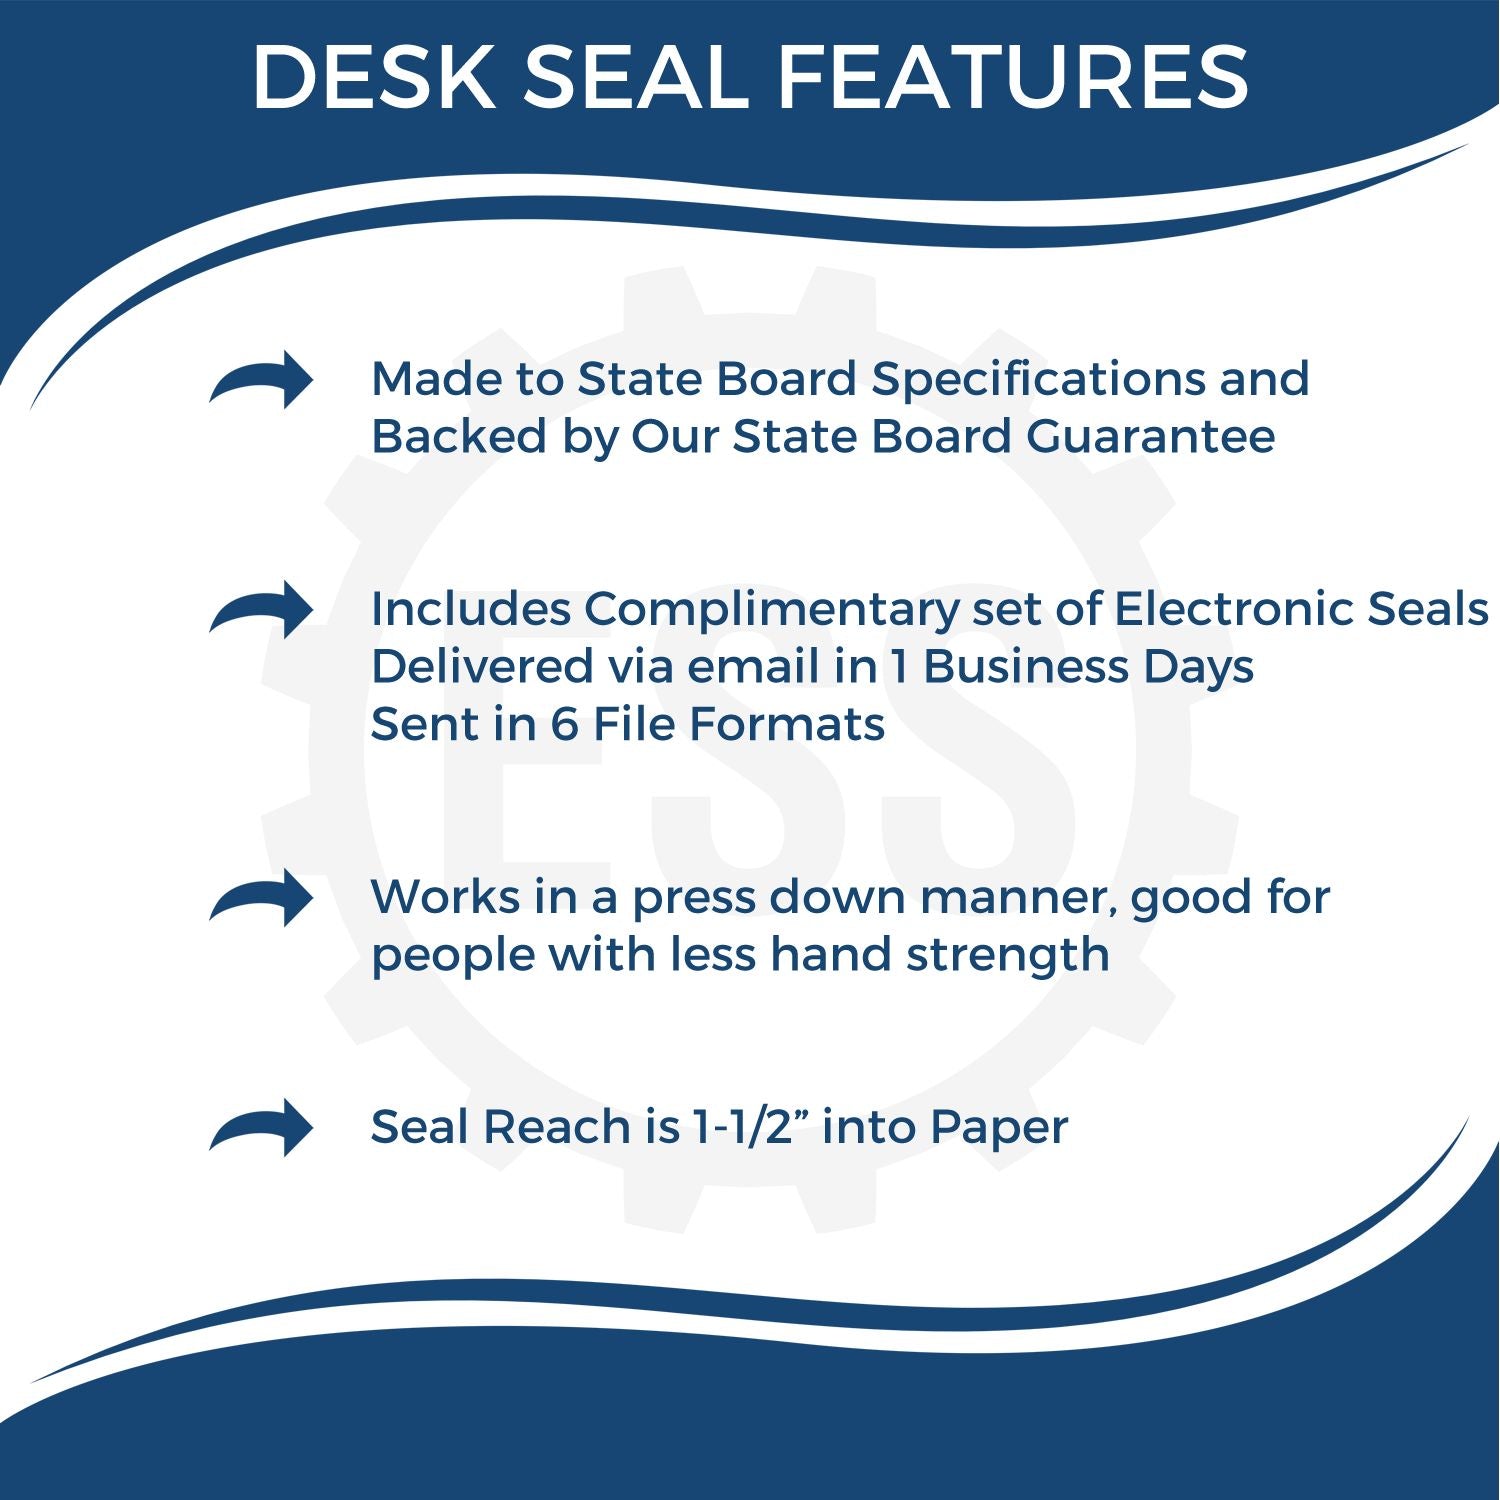 A picture of an infographic highlighting the selling points for the Oregon Engineer Desk Seal